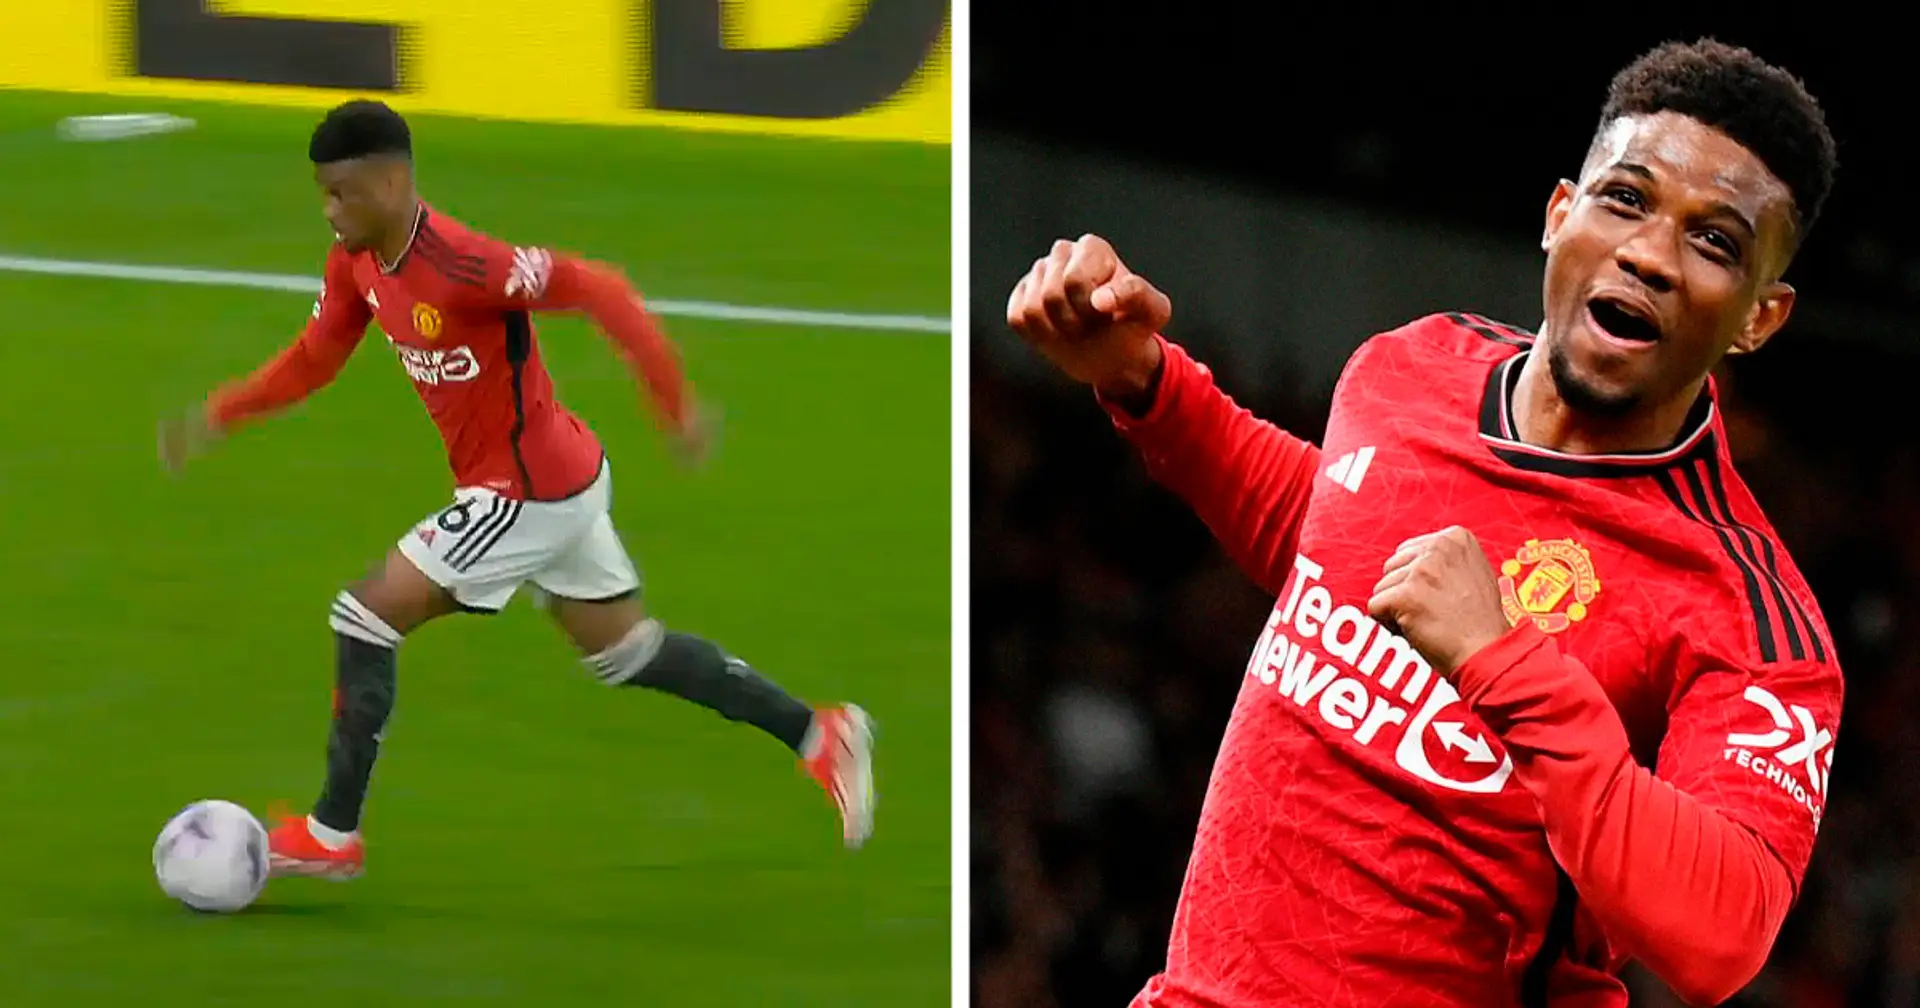 United fan shares a very unpopular opinion on Amad Diallo – it's not what fans expect in the future